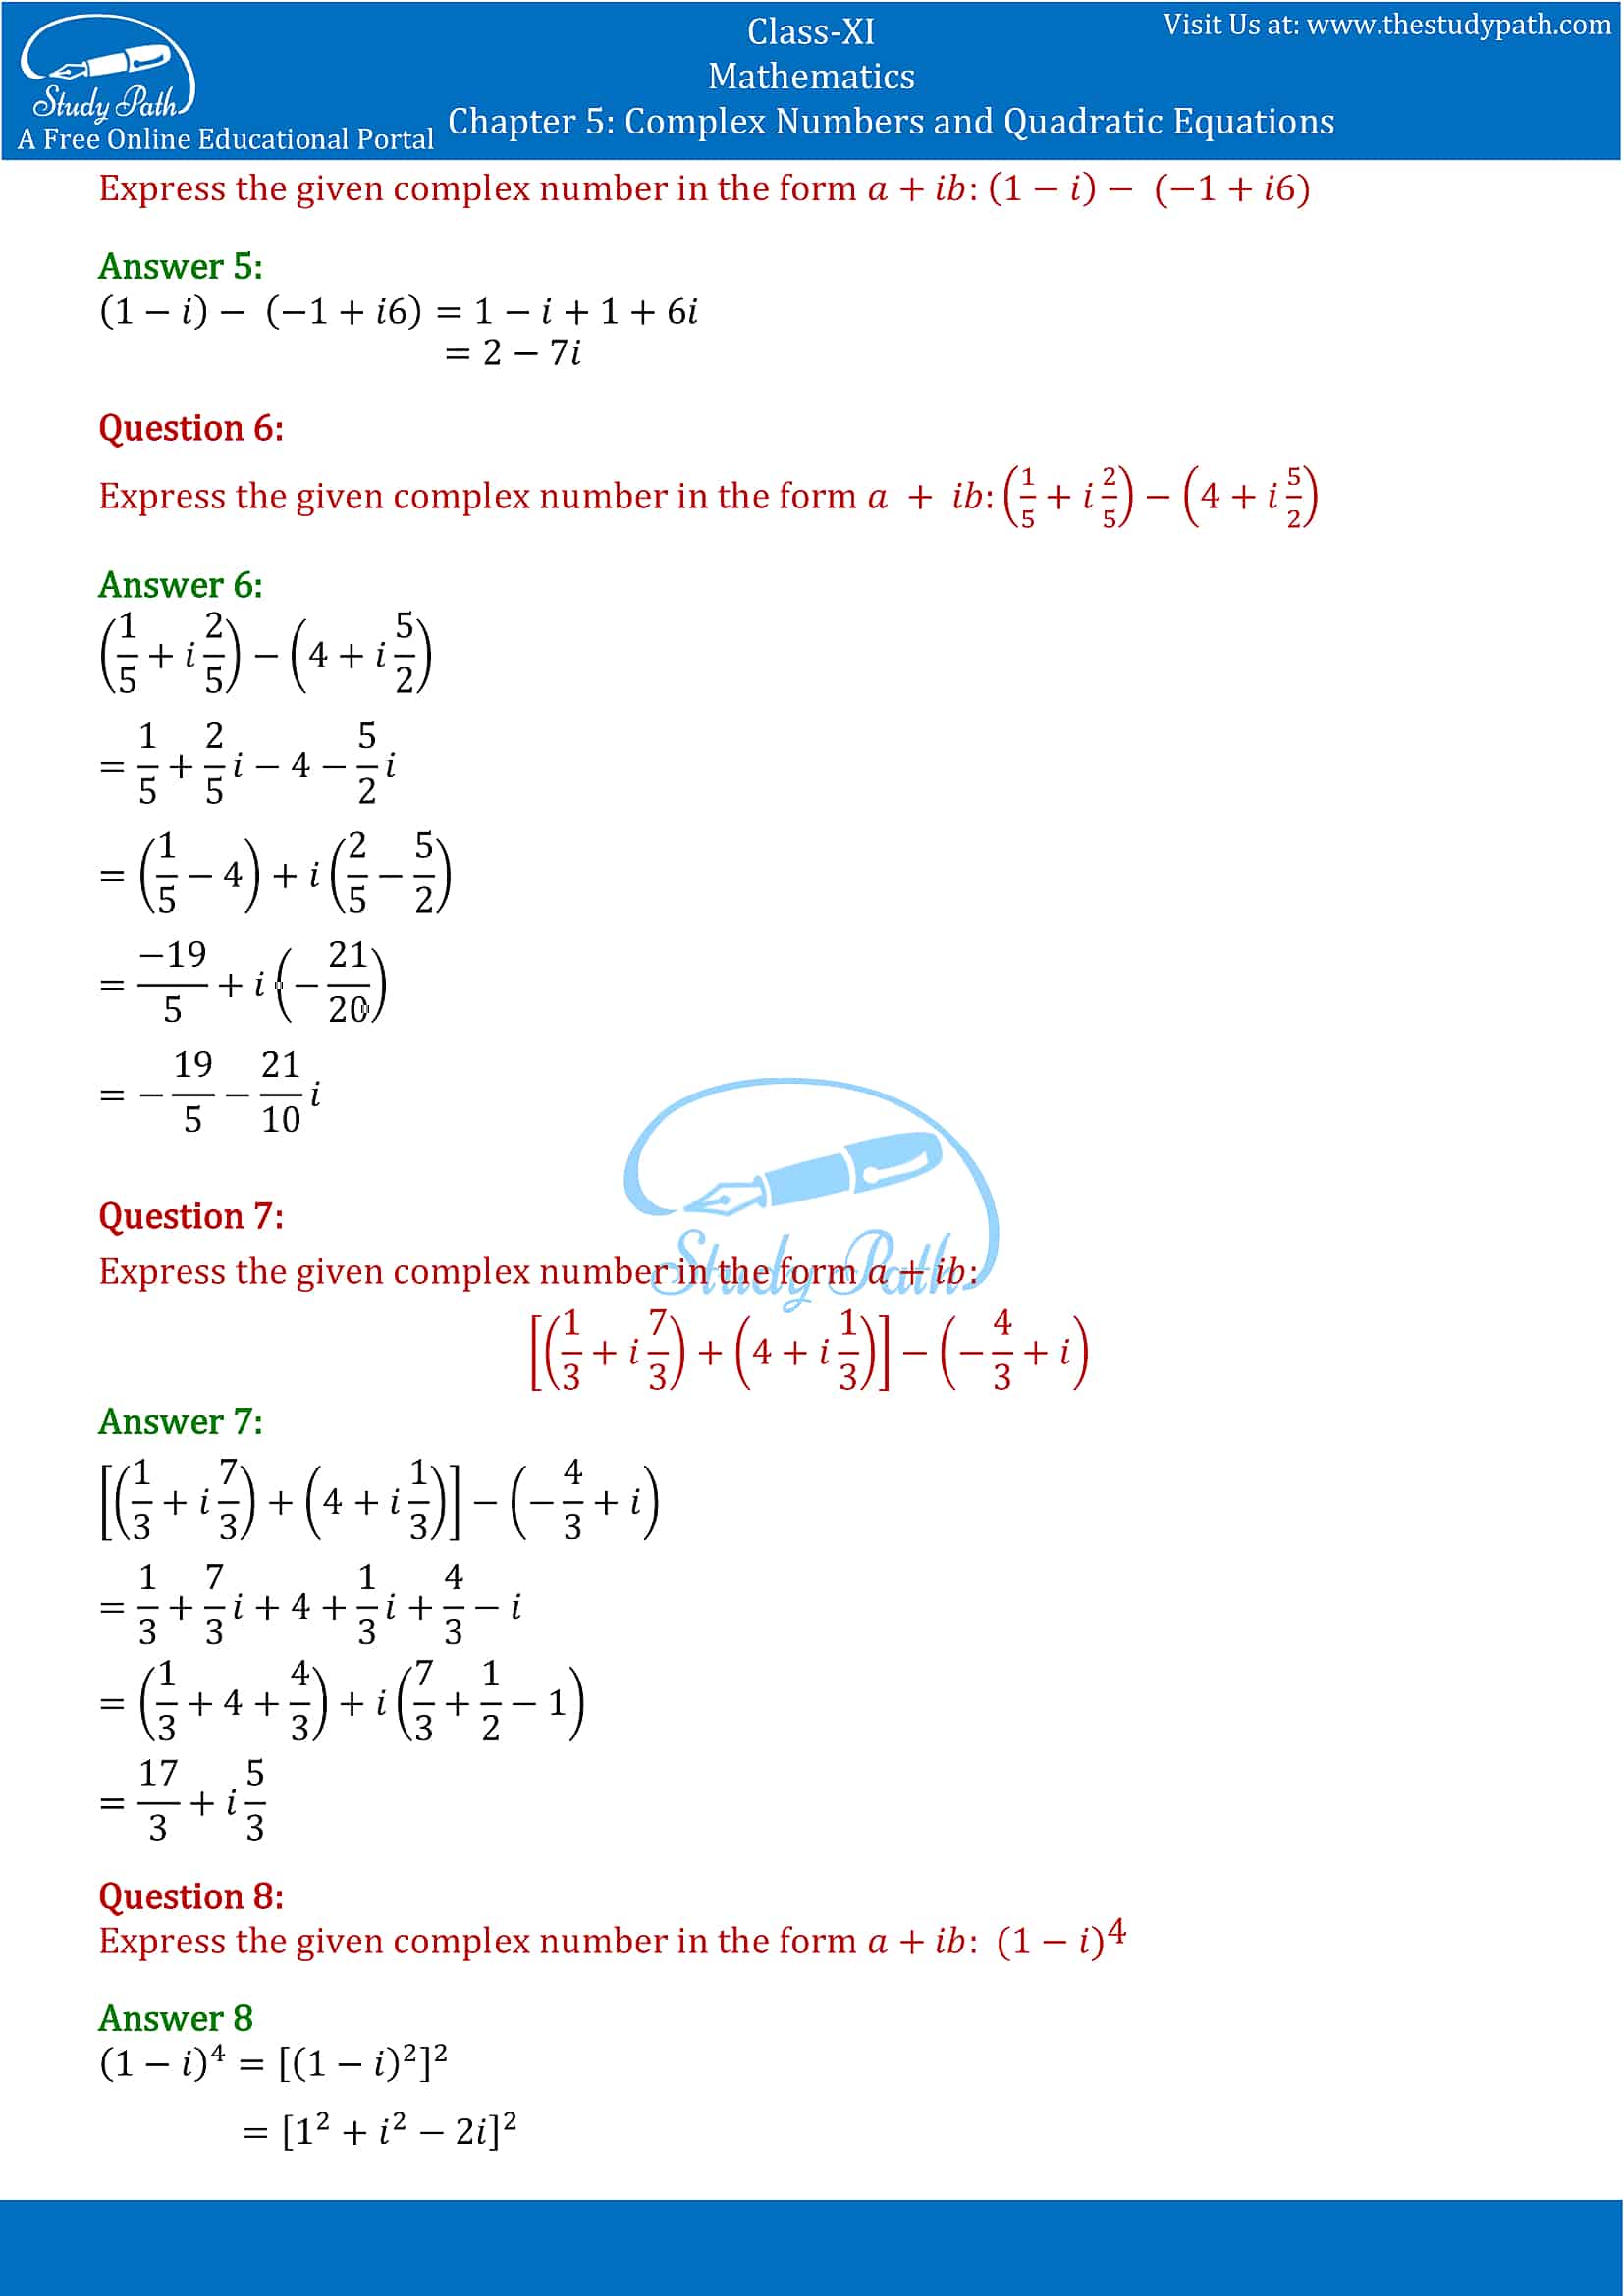 NCERT Solutions for Class 11 Maths chapter 5 Complex Numbers and Quadratic Equations part-2